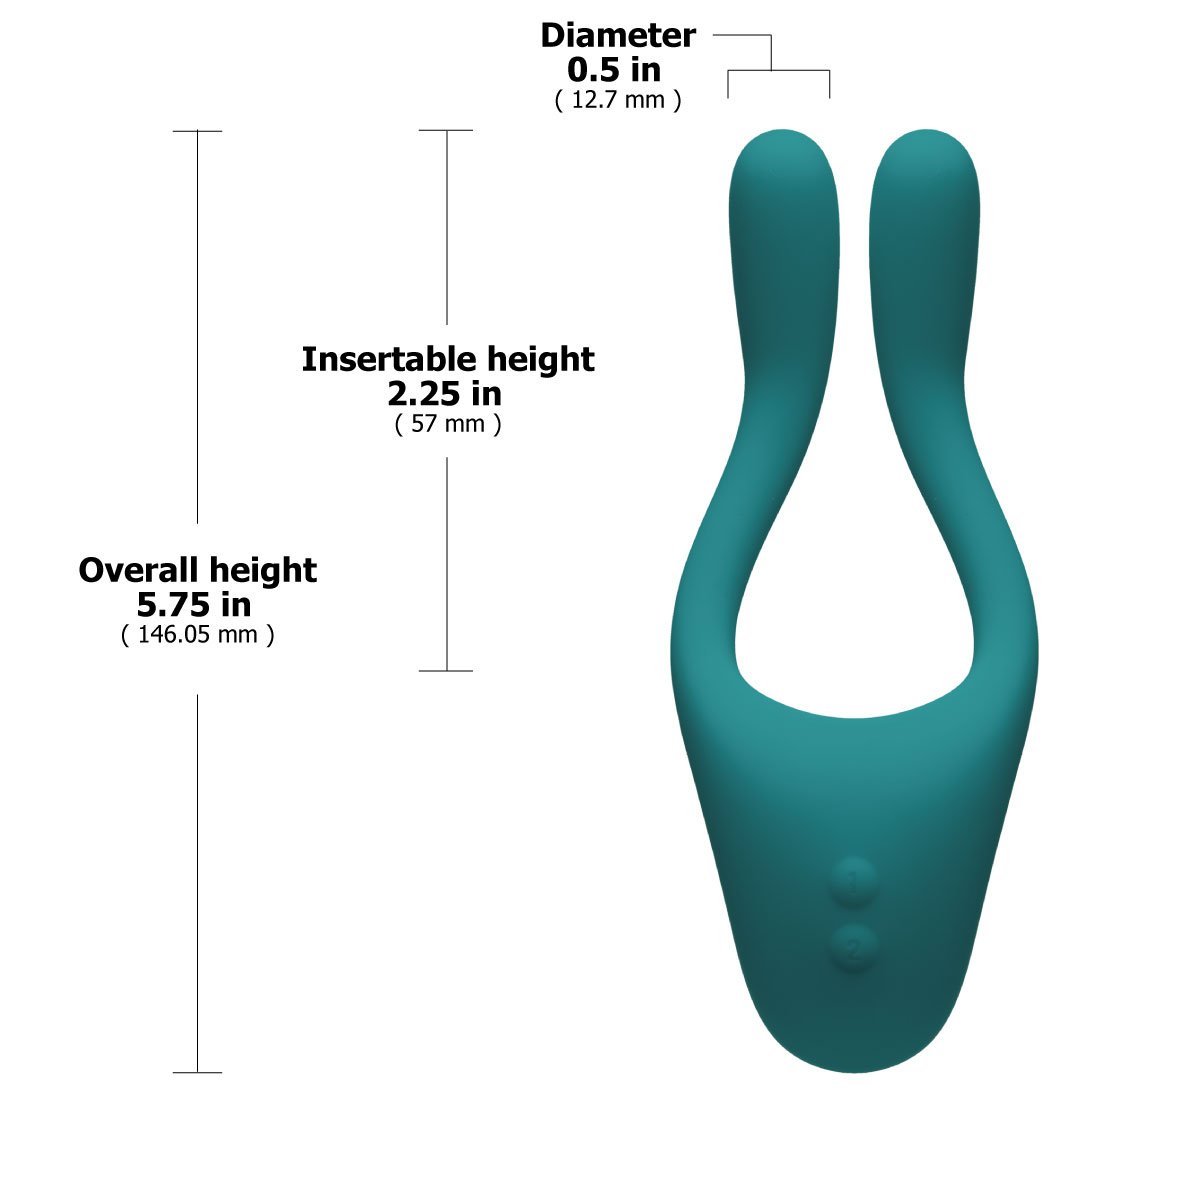 Doc Johnson Tryst V2 Bendable Multi Erogenous Zone Silicone Massager - Teal